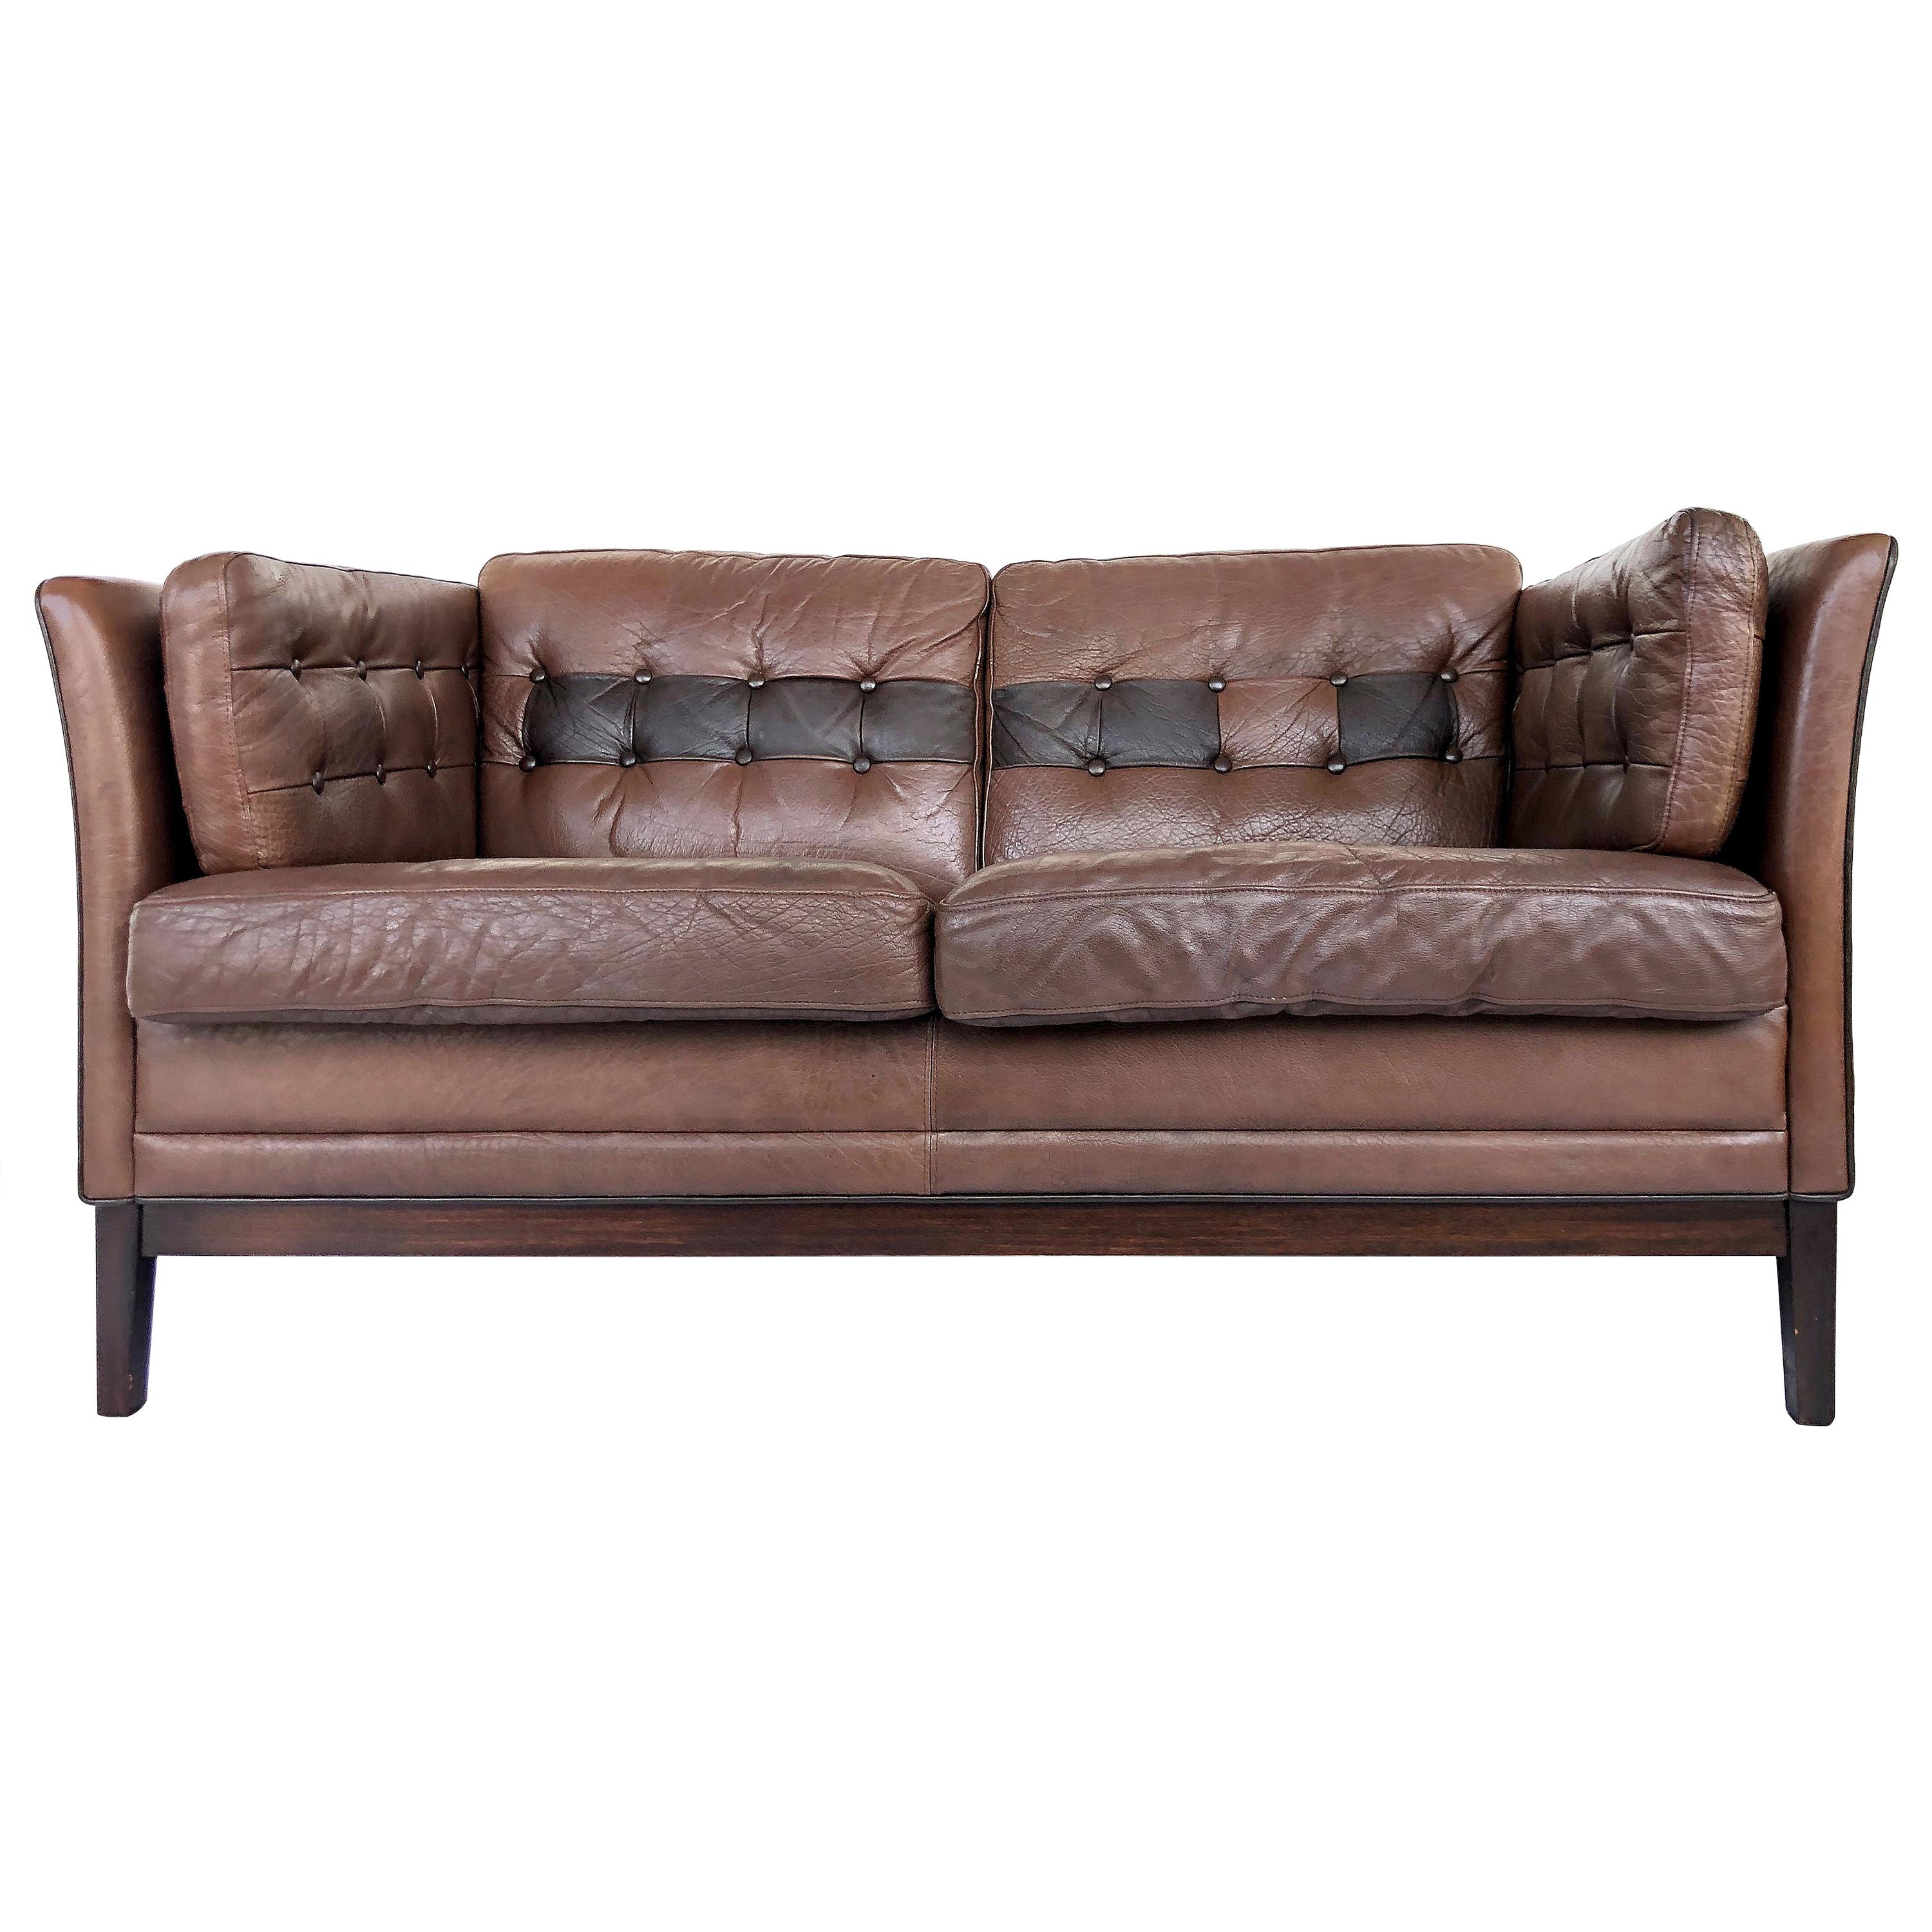 1970s Danish Modern Leather and Rosewood Settee